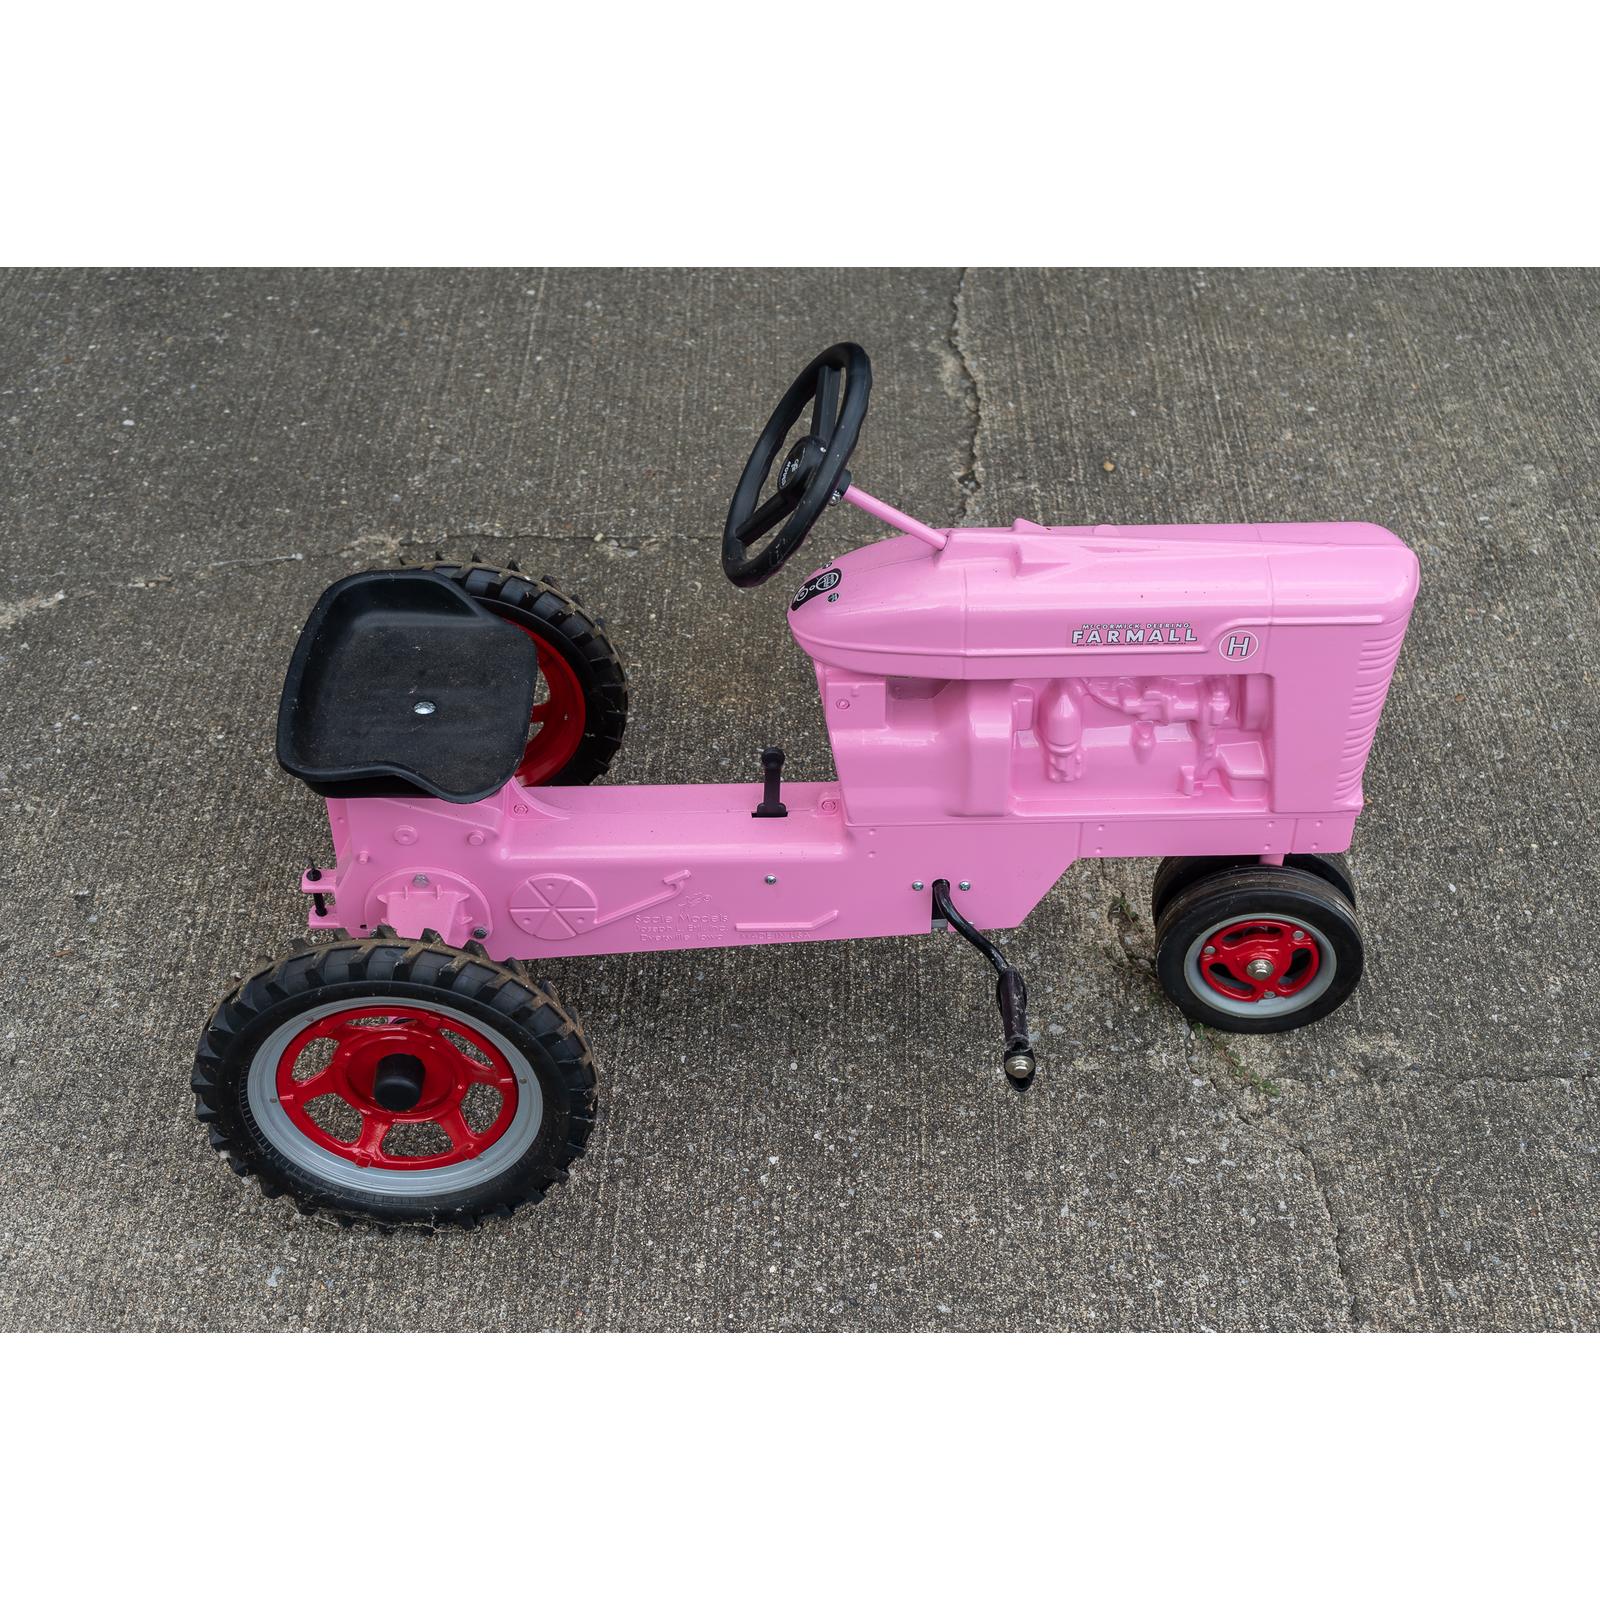 Ertl Farmall Pink Toy Pedal Tractor